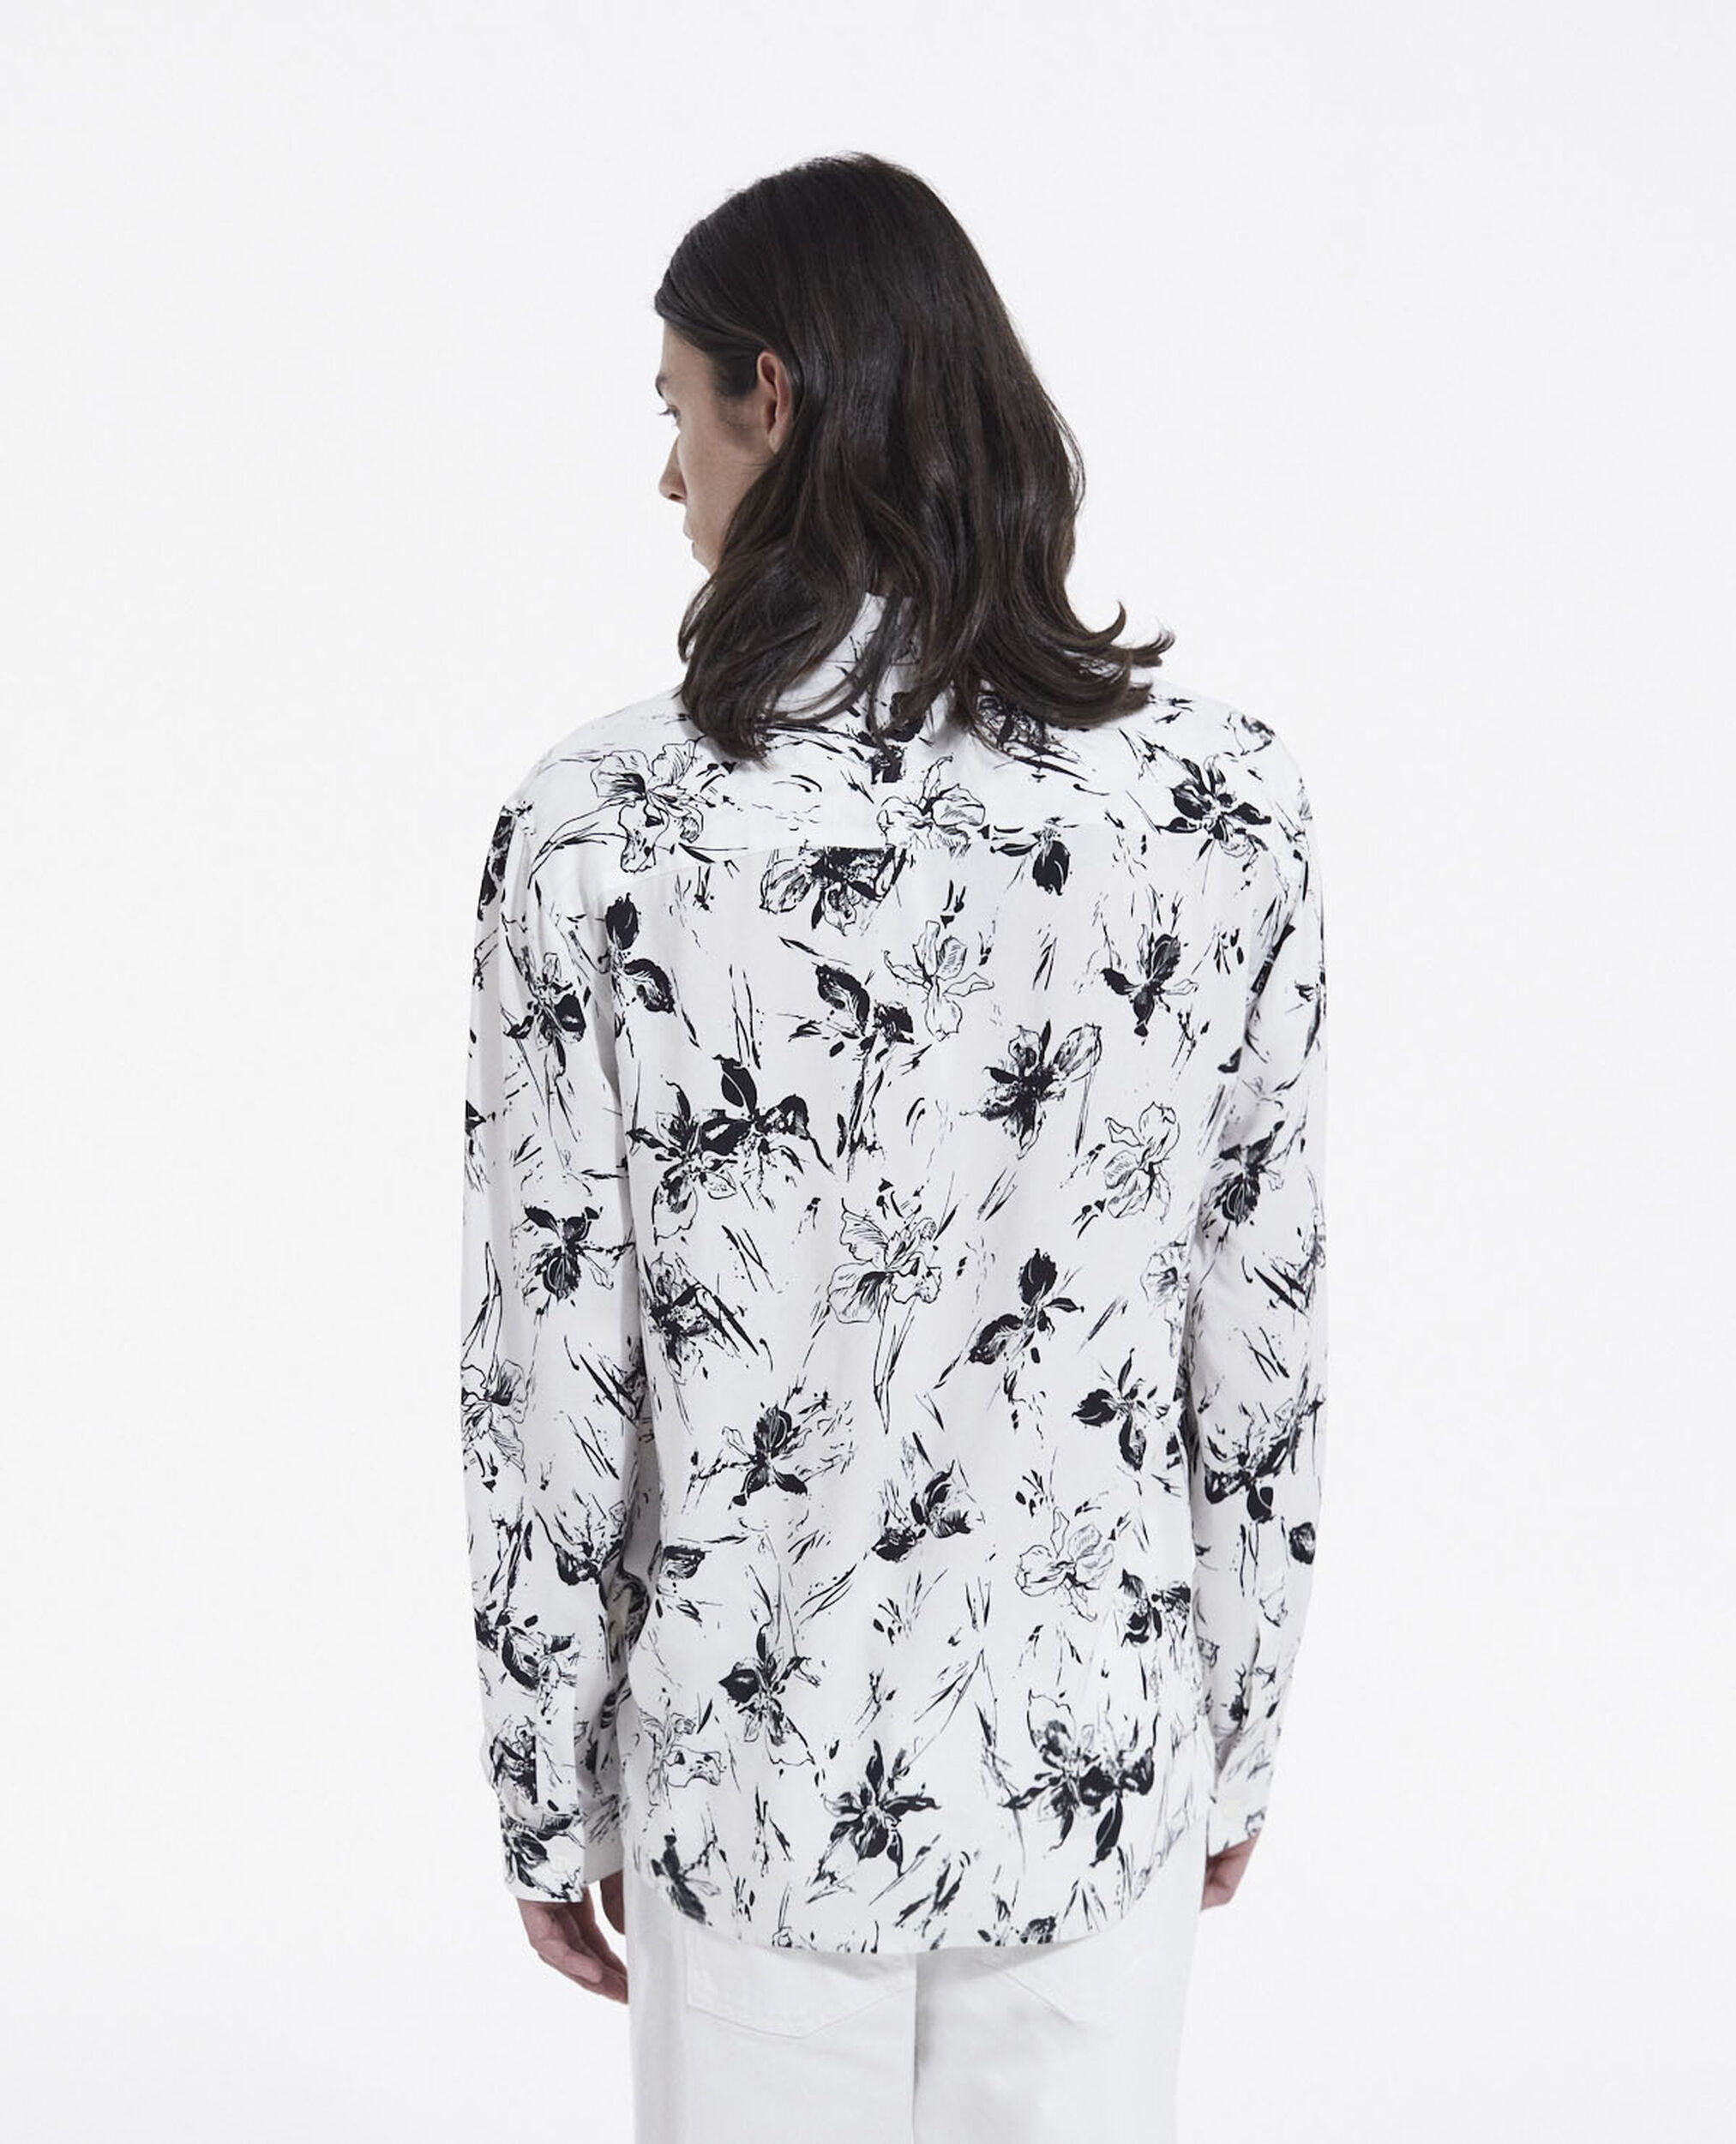 Men's white shirt with floral print, WHITE / BLACK, hi-res image number null